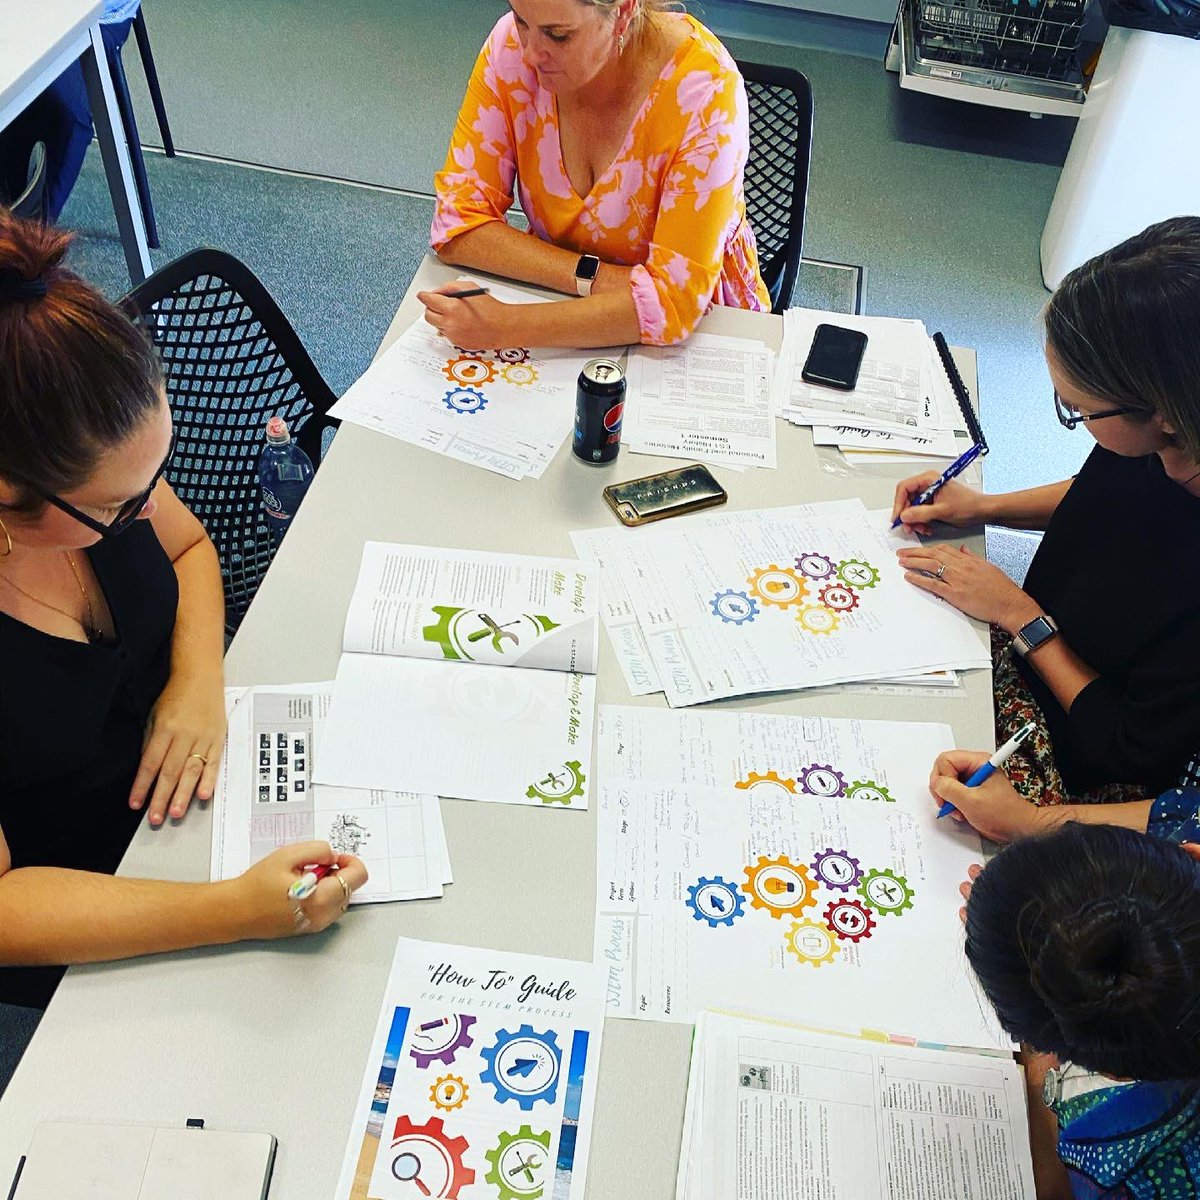 Working with the Super Stars 🌟 of Umina Beach Public School, soon to integrate our STEM process into History units in their fresh new STEM Room.. watch this space for it’s launch! #ccase #uminabeachpublicschool #stemeducation #publiceducation #centralcoastnsw #uminabeach